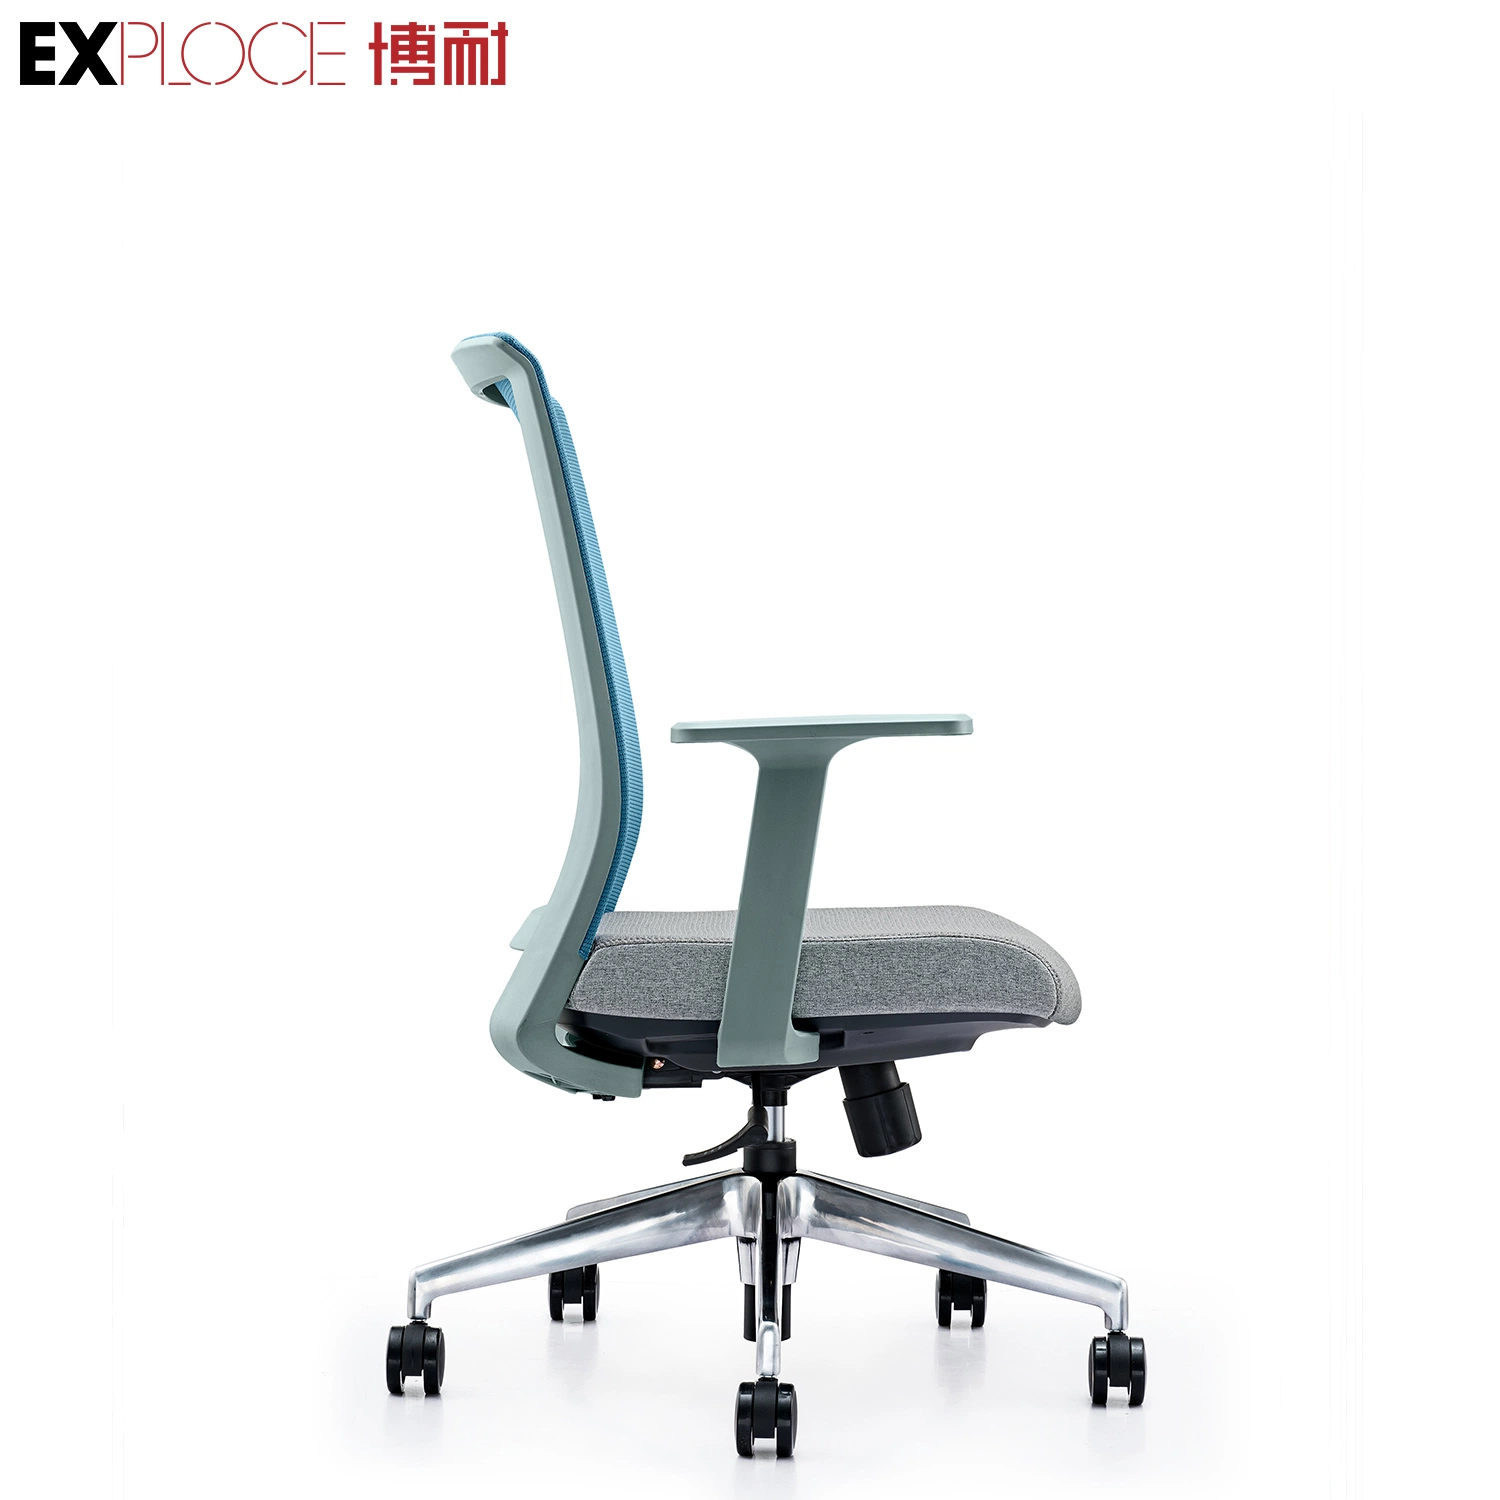 Modern Cheap Price Manager Desk Chairs Executive Swivel High Back Black Mesh Ergonomic Without Headrest for Office Furniture